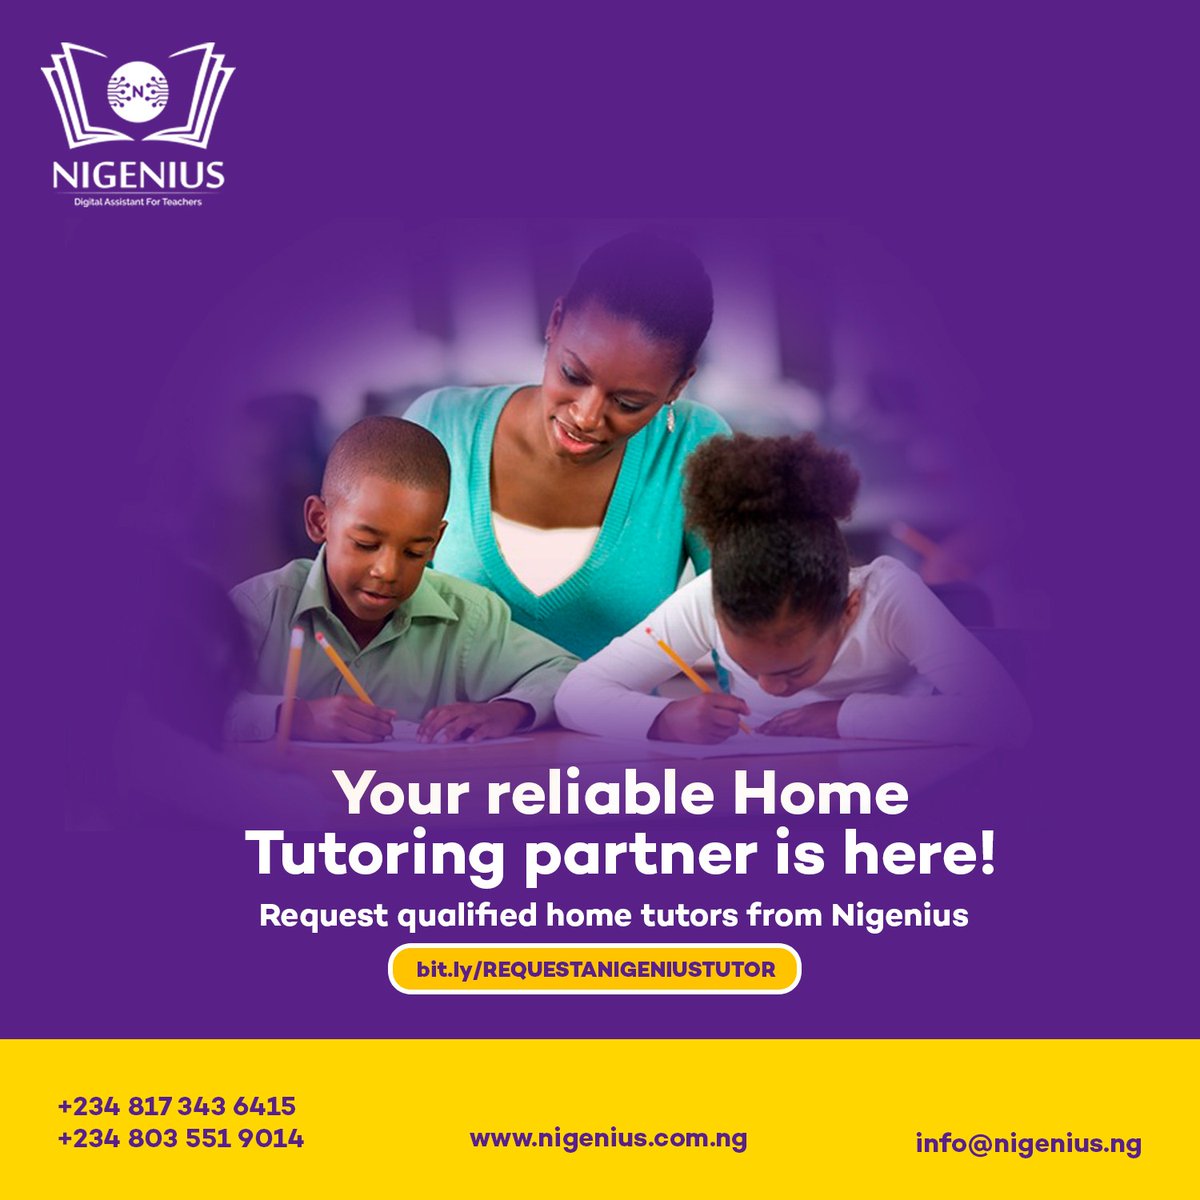 Improve your child's learning by getting an home tutor from Nigenius.

Contact us today to get started! To request qualified online & in person home tutors, use link bit.ly/REQUESTANIGENI… or click on the link in our bio.

#Coding #robotics #steamfest #nigenius #kidcoder